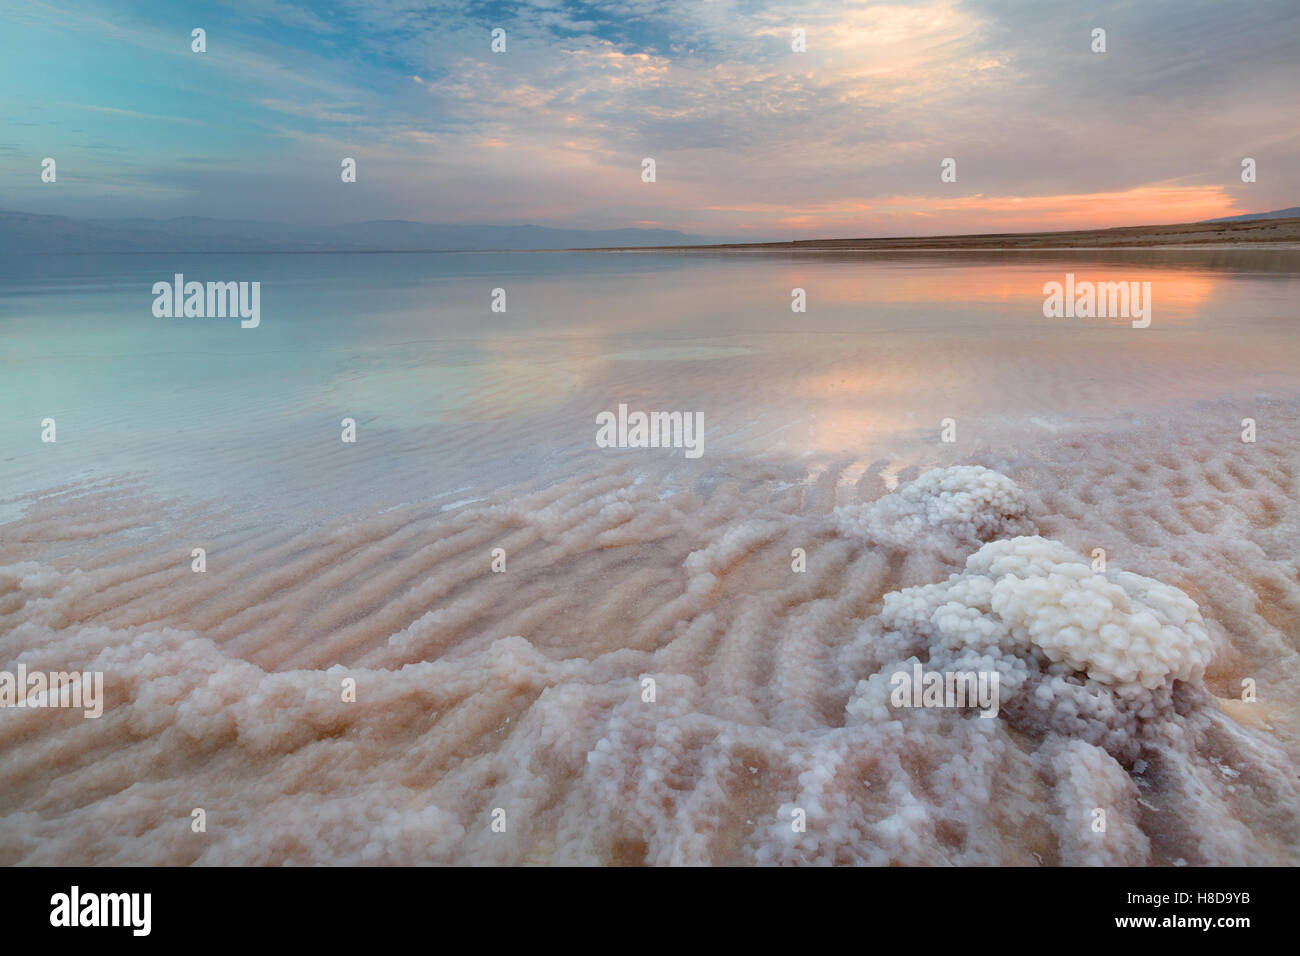 View of Dead Sea coastline at sunset time Stock Photo